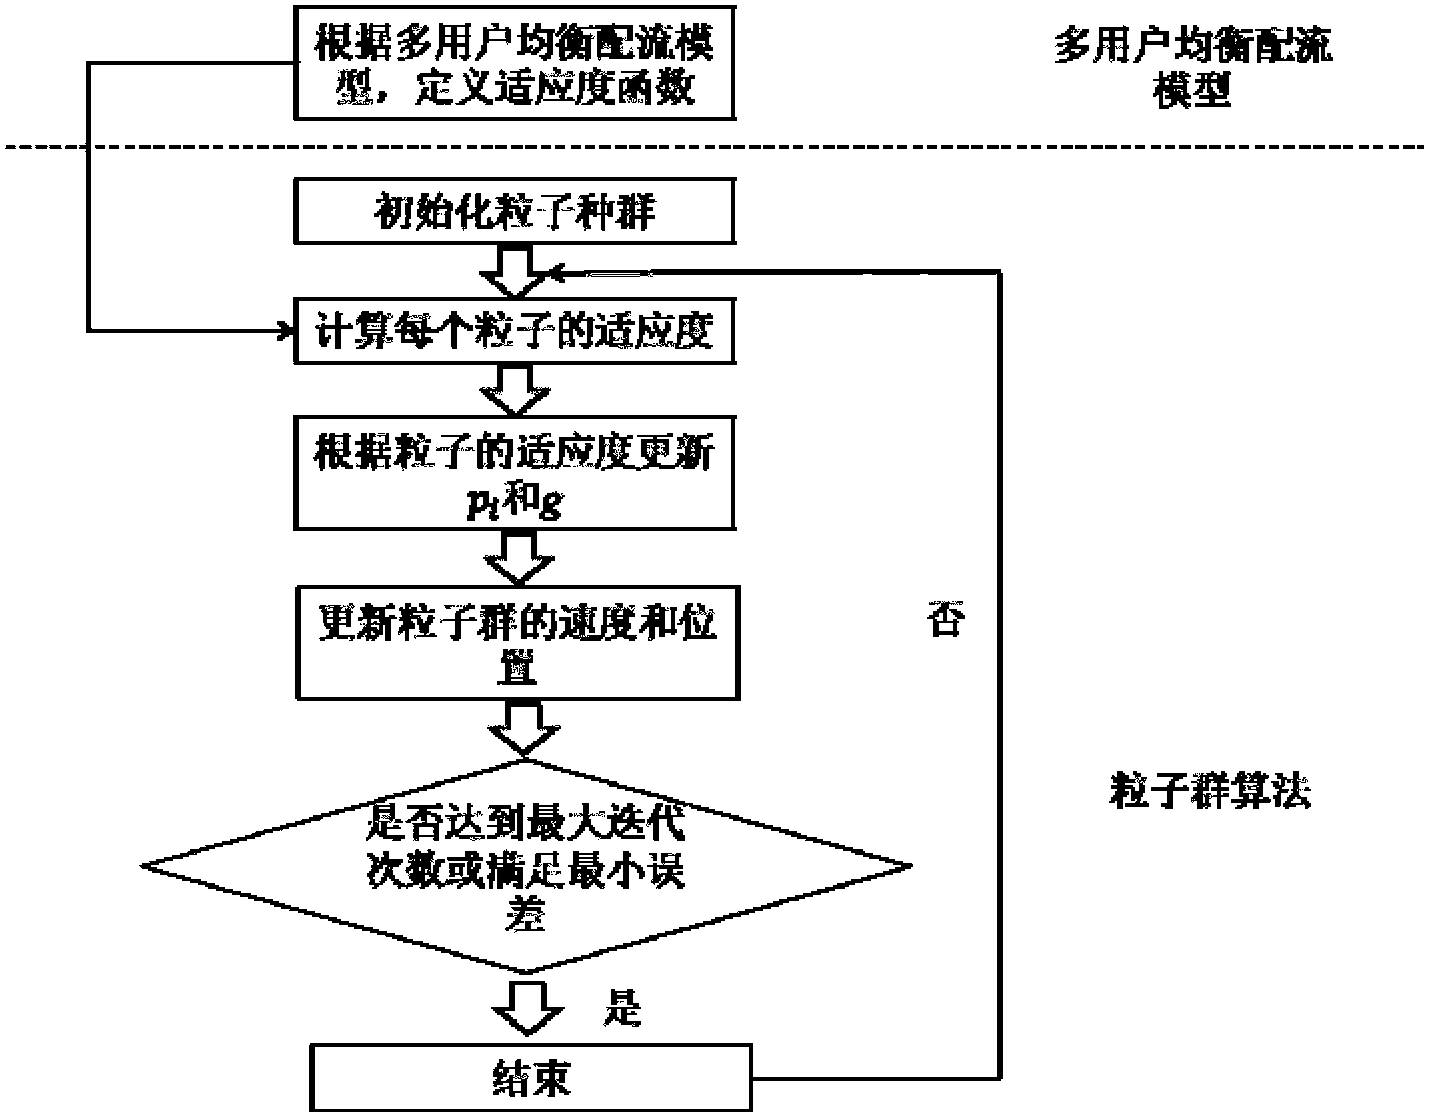 Airport collecting and distributing traffic volume determination method based on multi-user assignment model